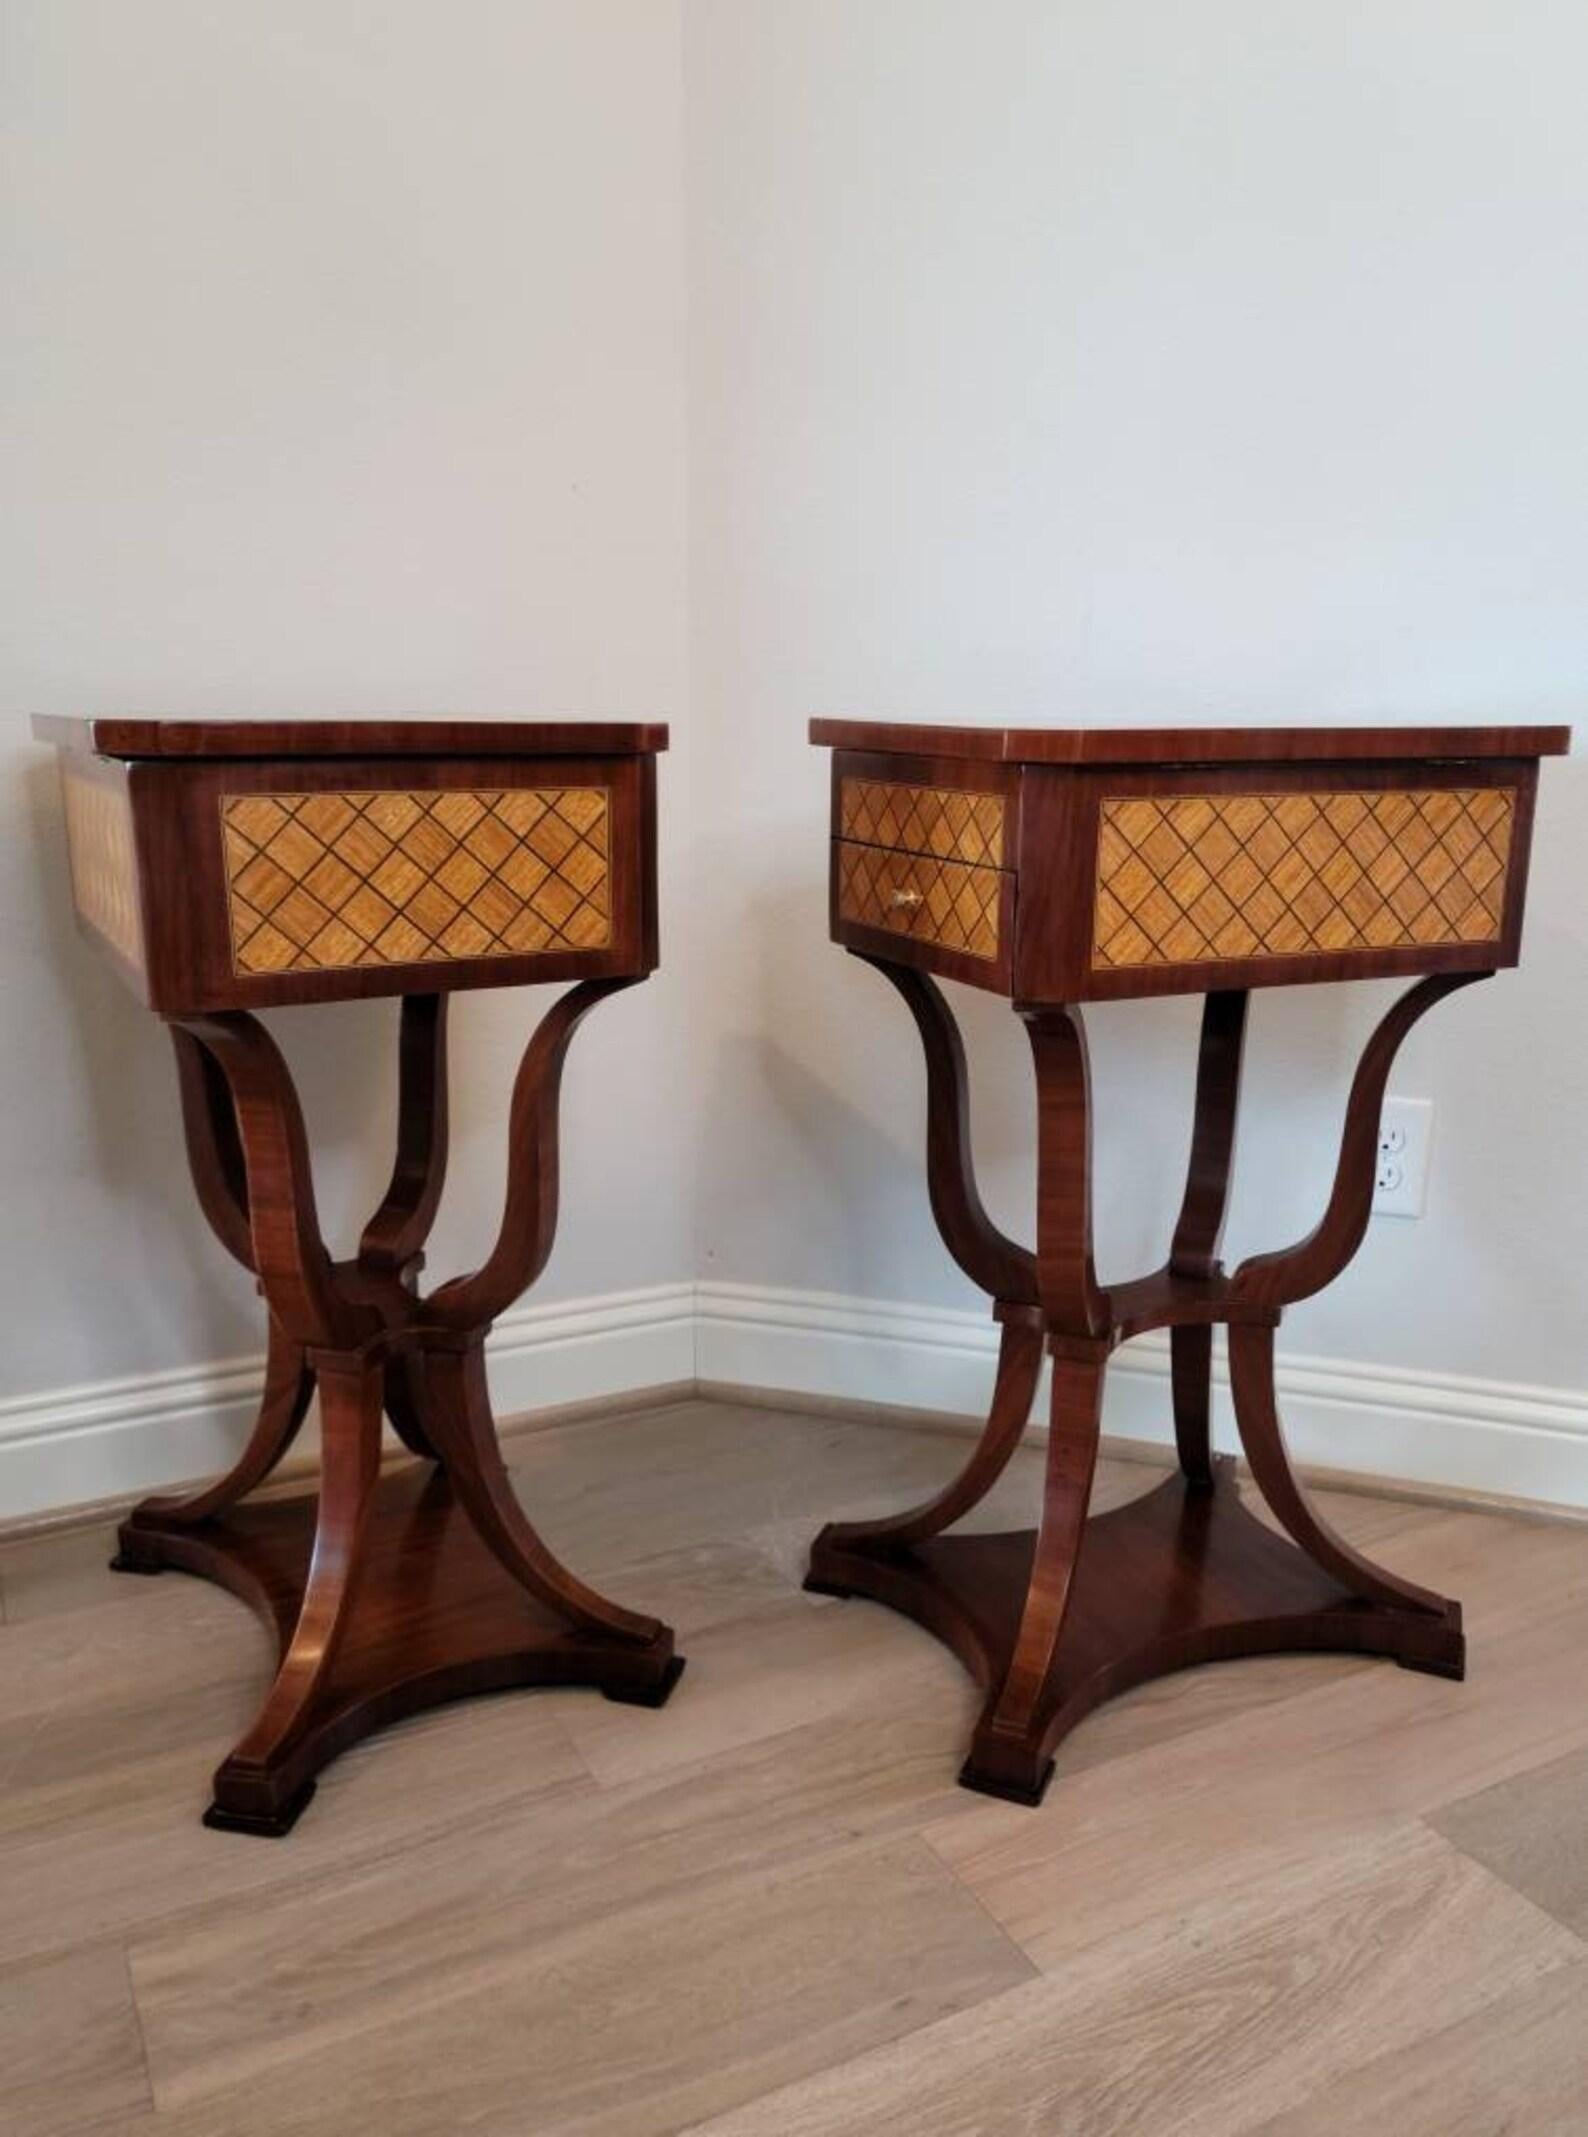 Gilt Pair of Italian Neoclassical Chessboard Parquetry Inlaid Tables For Sale